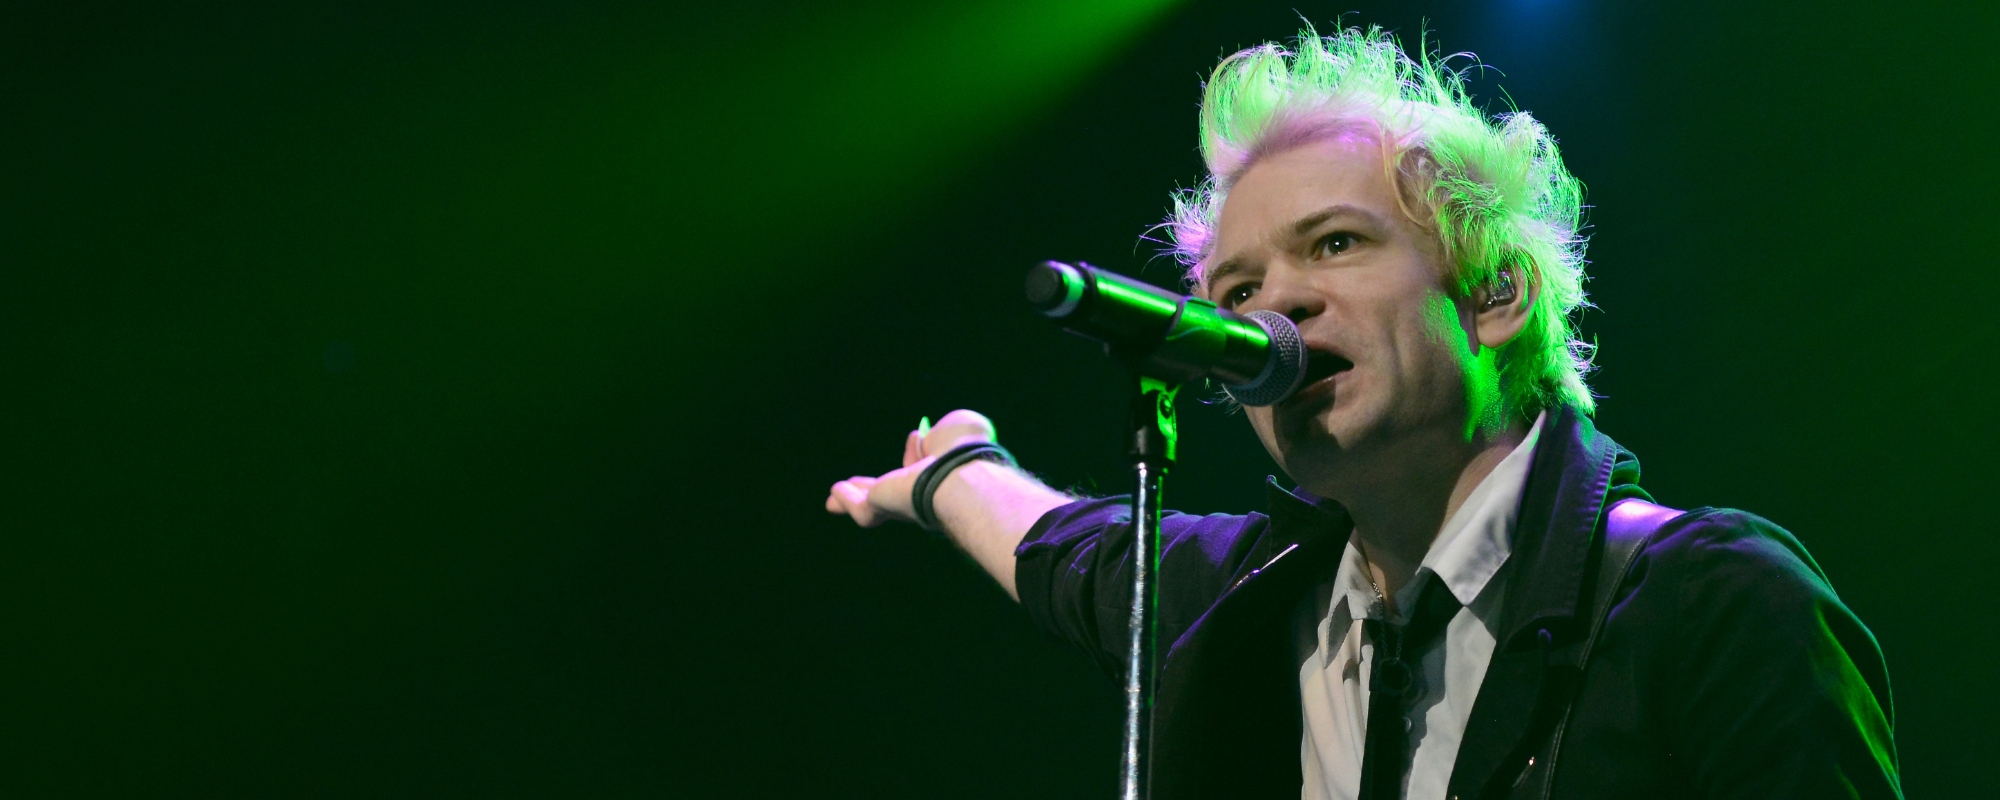 Sum 41 to Break Up After 27 Years - American Songwriter